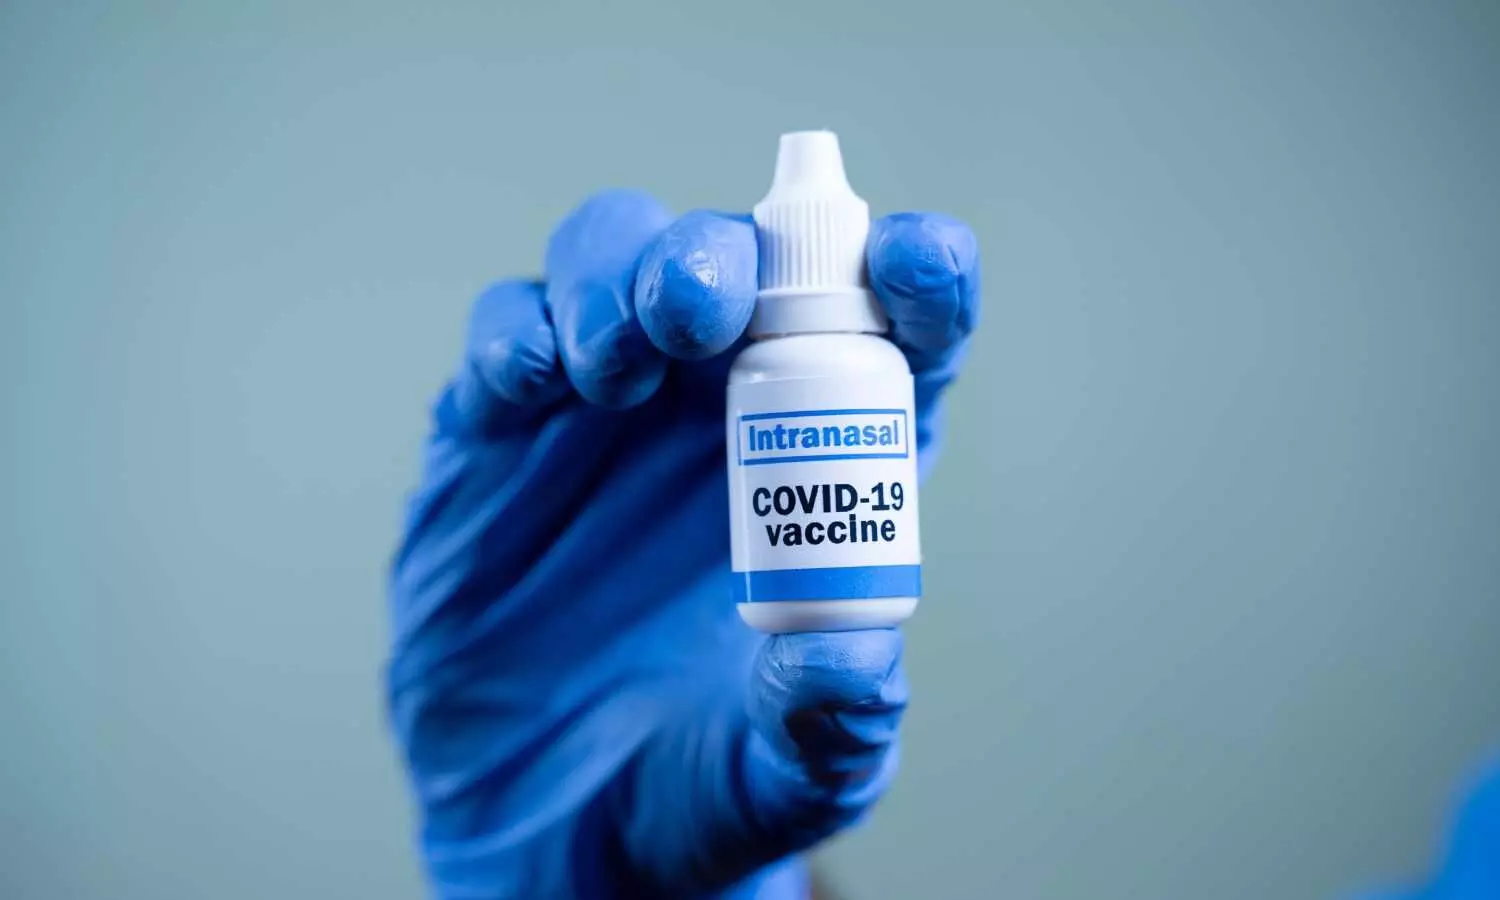 World’s First Intra-Nasal Vaccine for COVID Gets CDSCO’s Approval